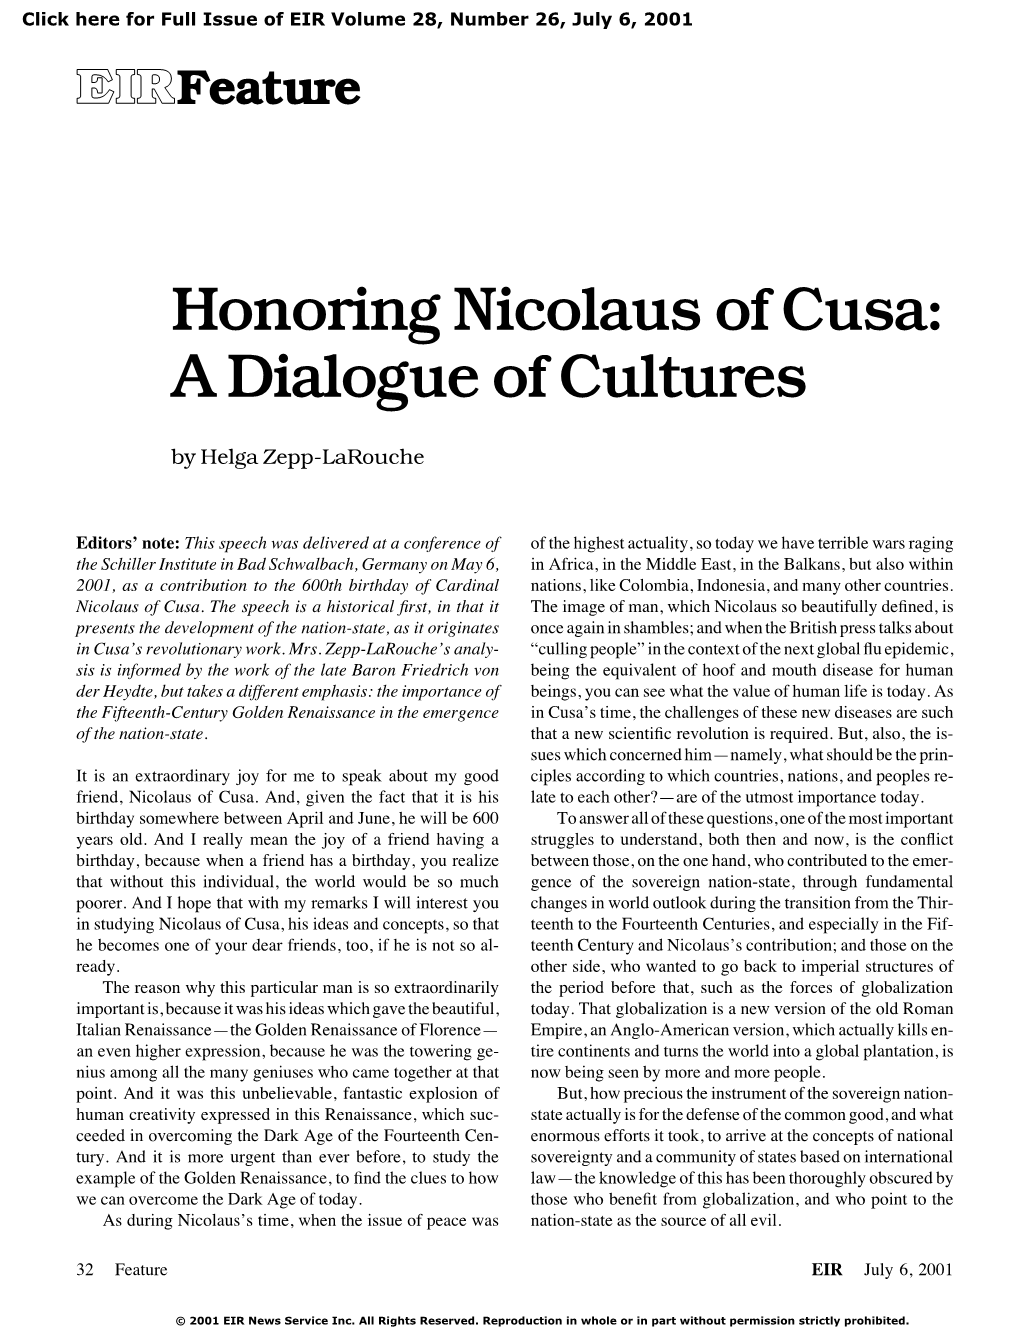 Honoring Nicolaus of Cusa: a Dialogue of Cultures